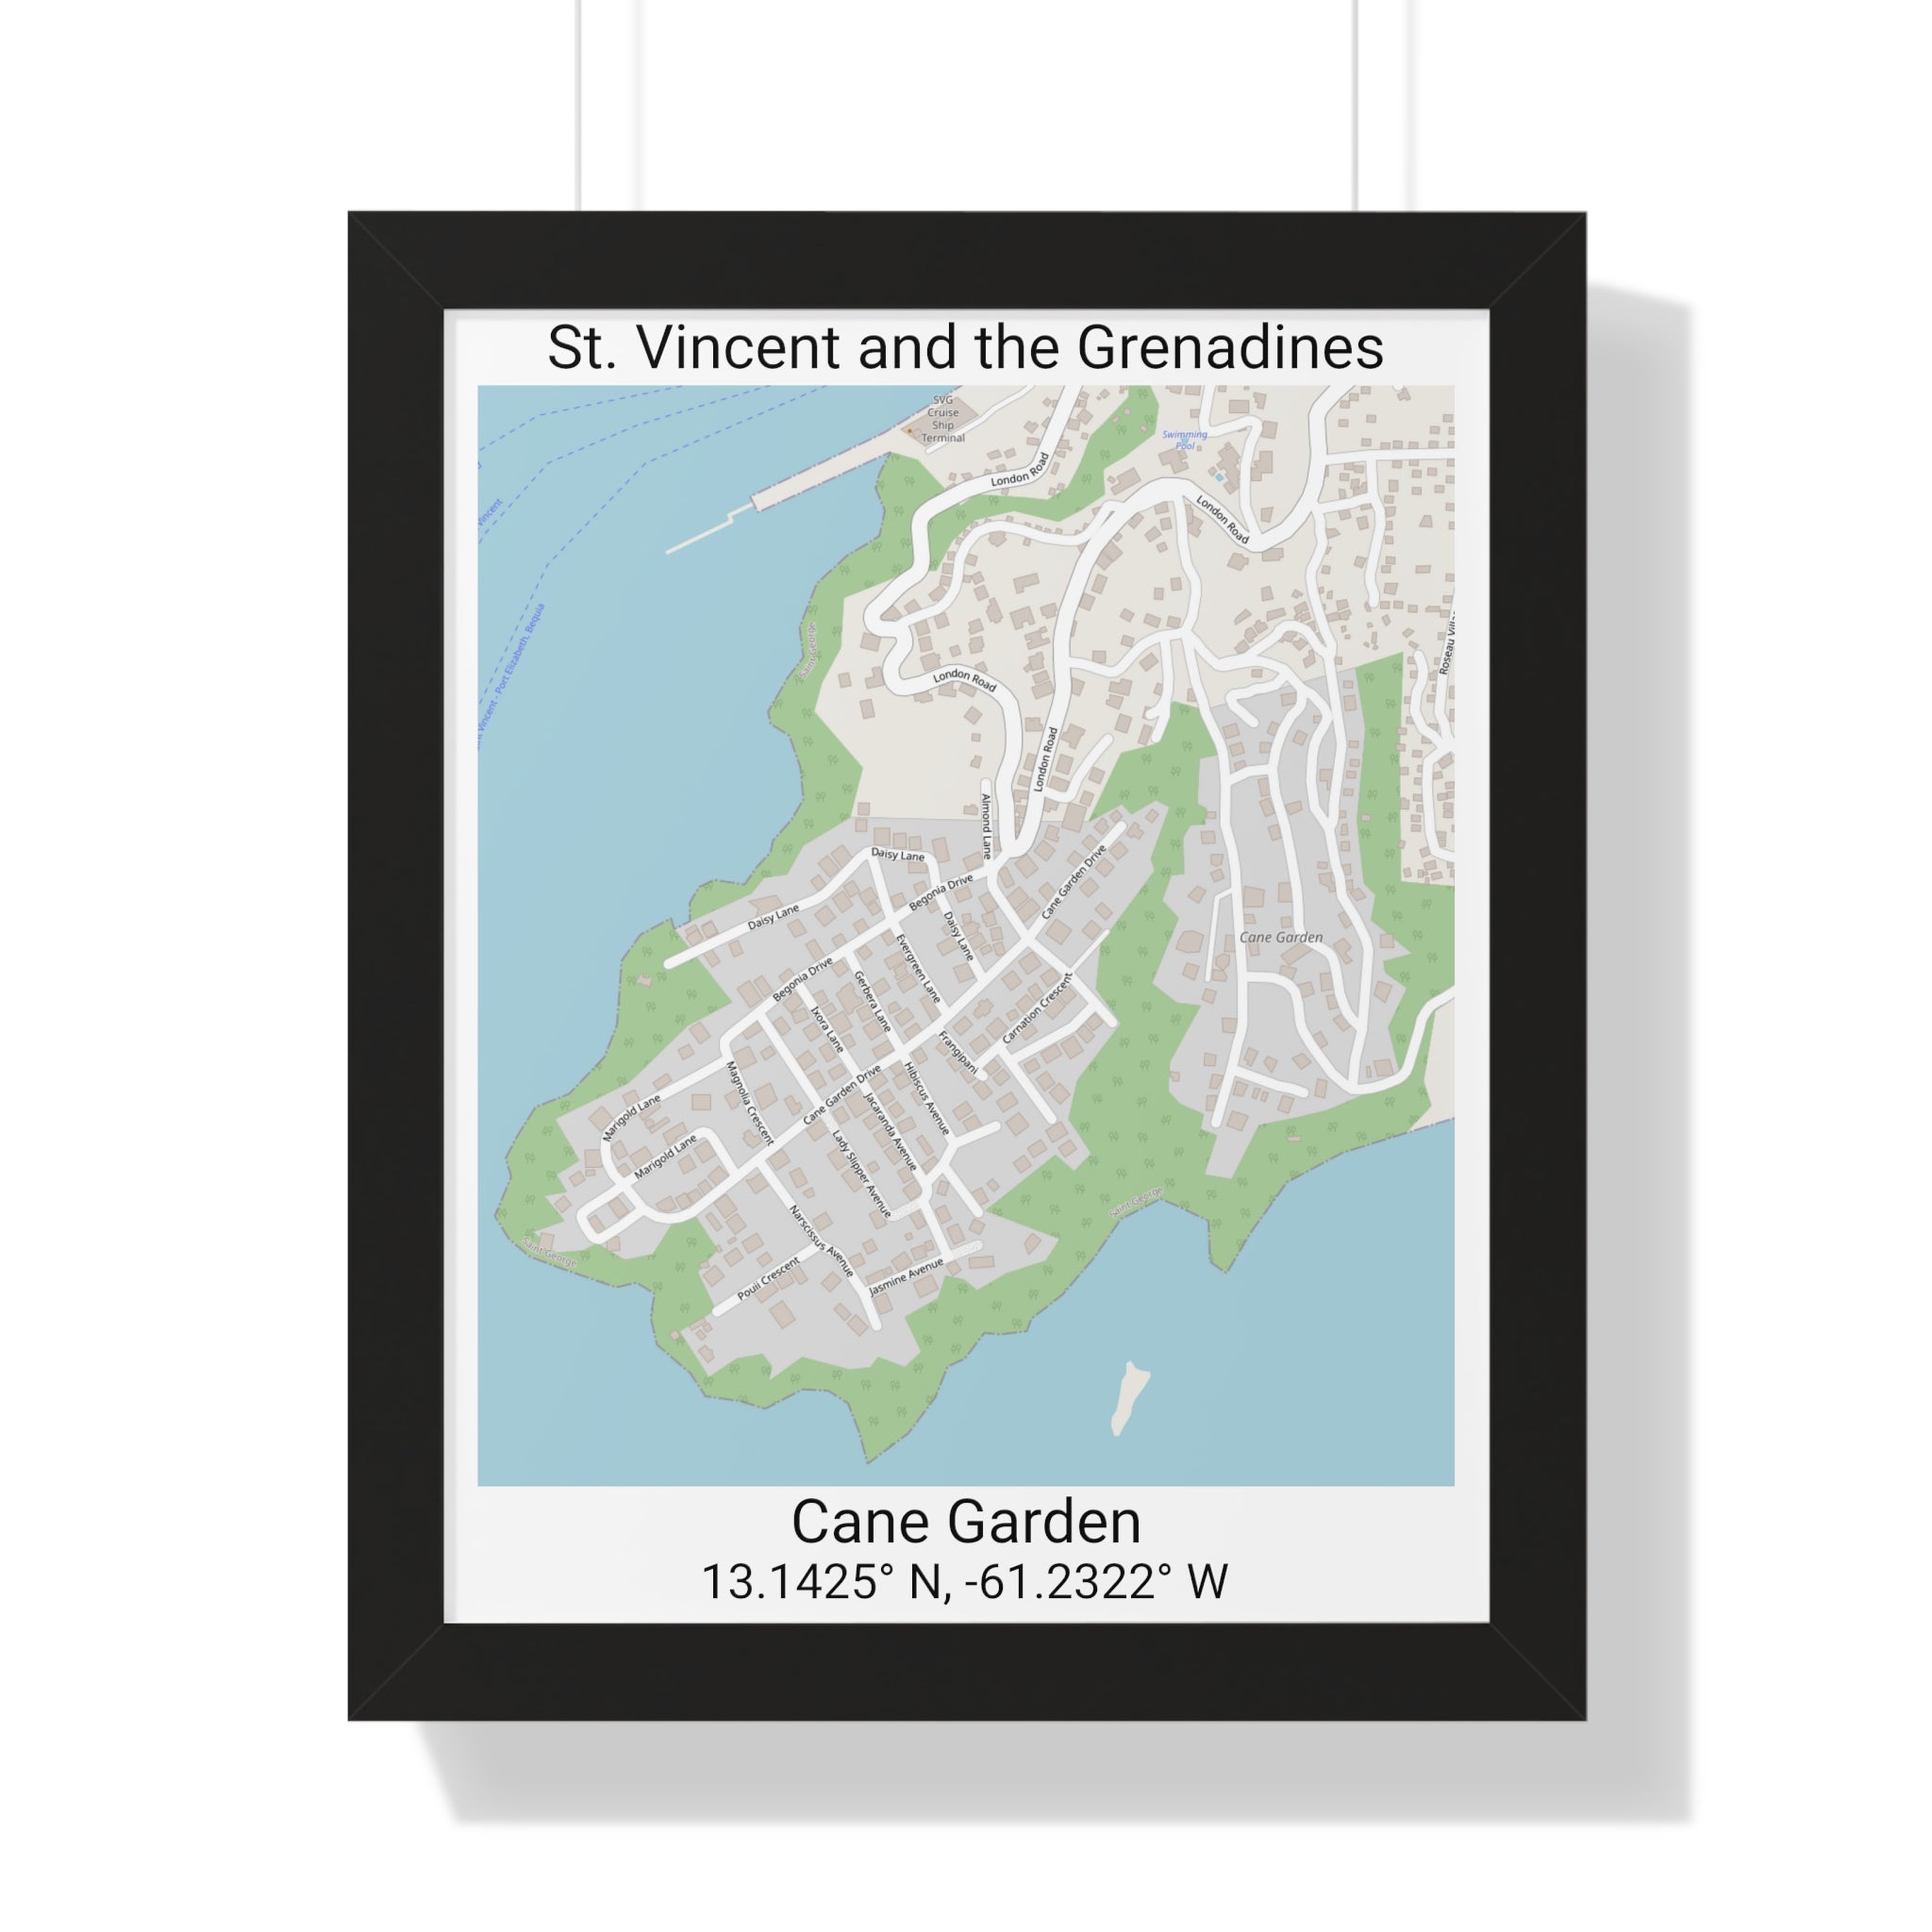 framed map poster of Cane Garden in St. Vincent and the Grenadines